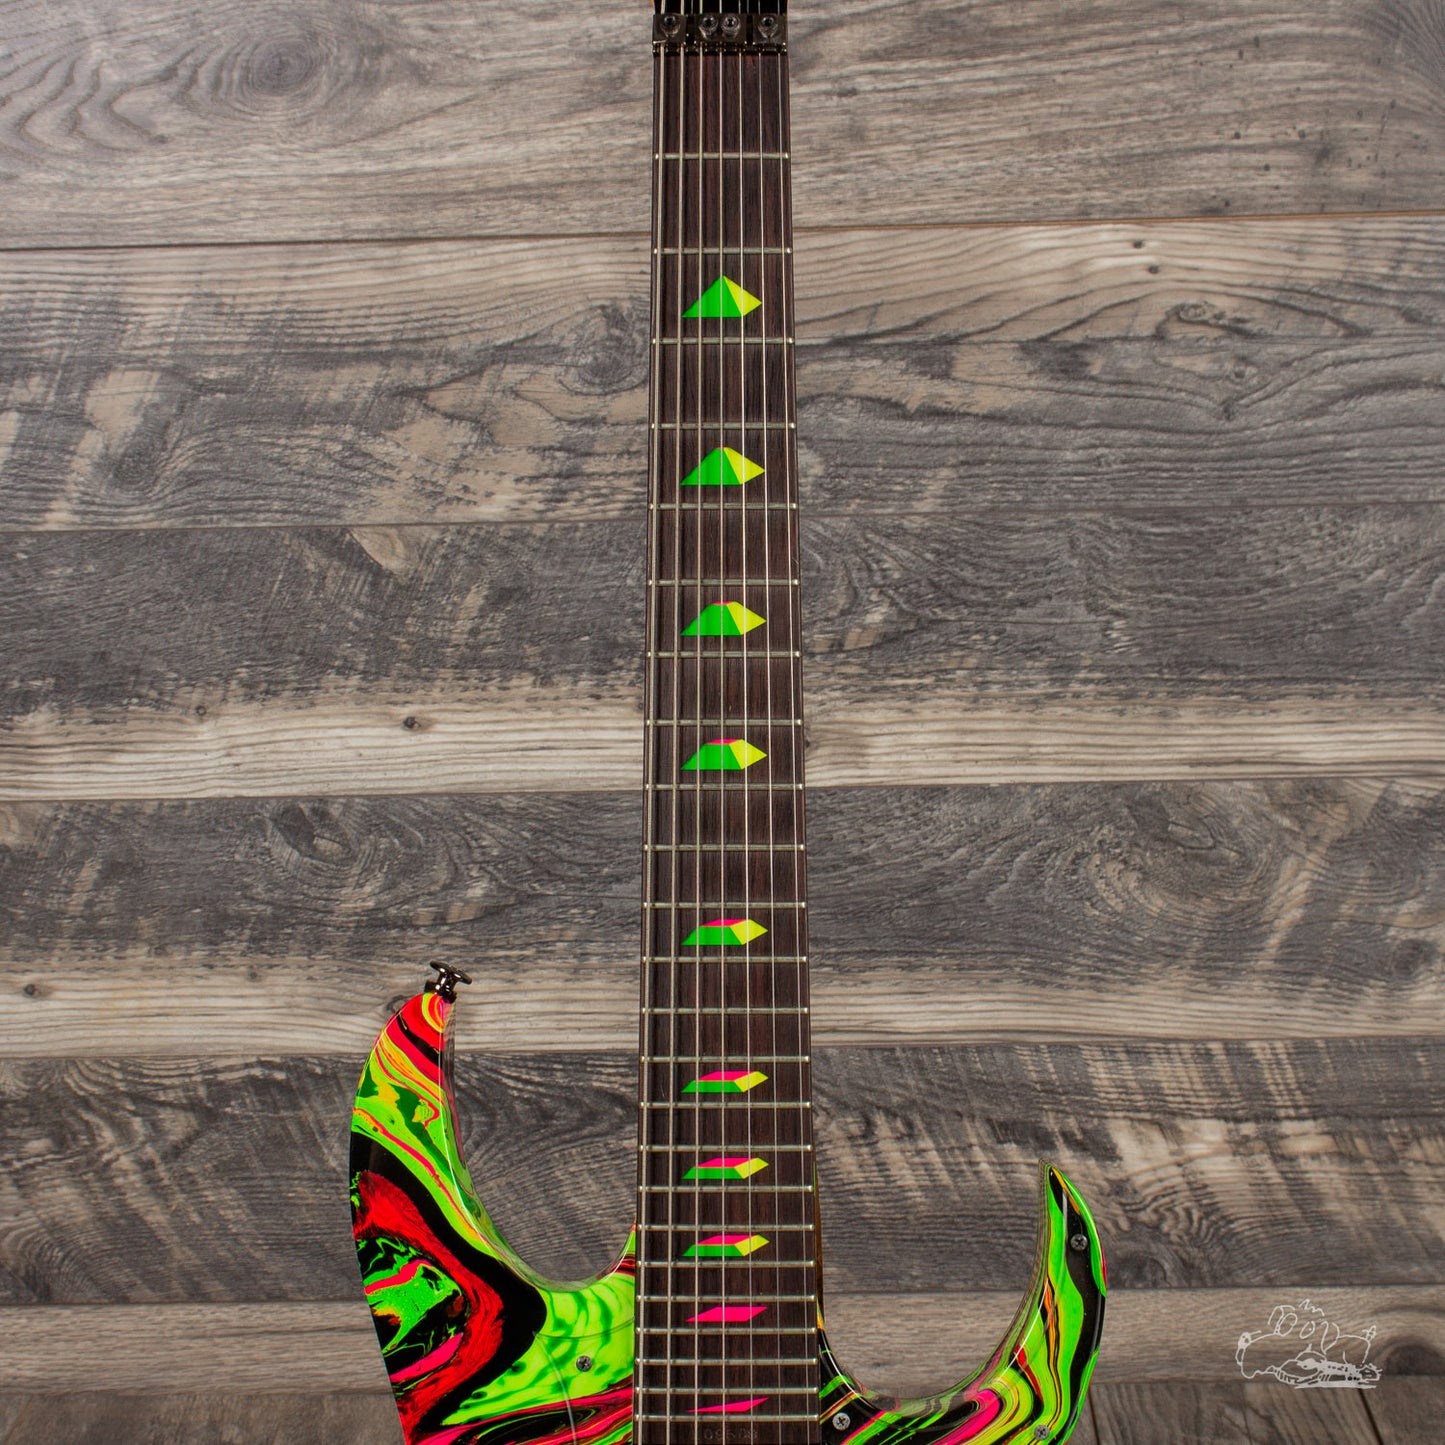 2010 Ibanez Steve Vai Signature UV77RE MC - 20th Anniversary - Only 100 Made - Make an Offer!